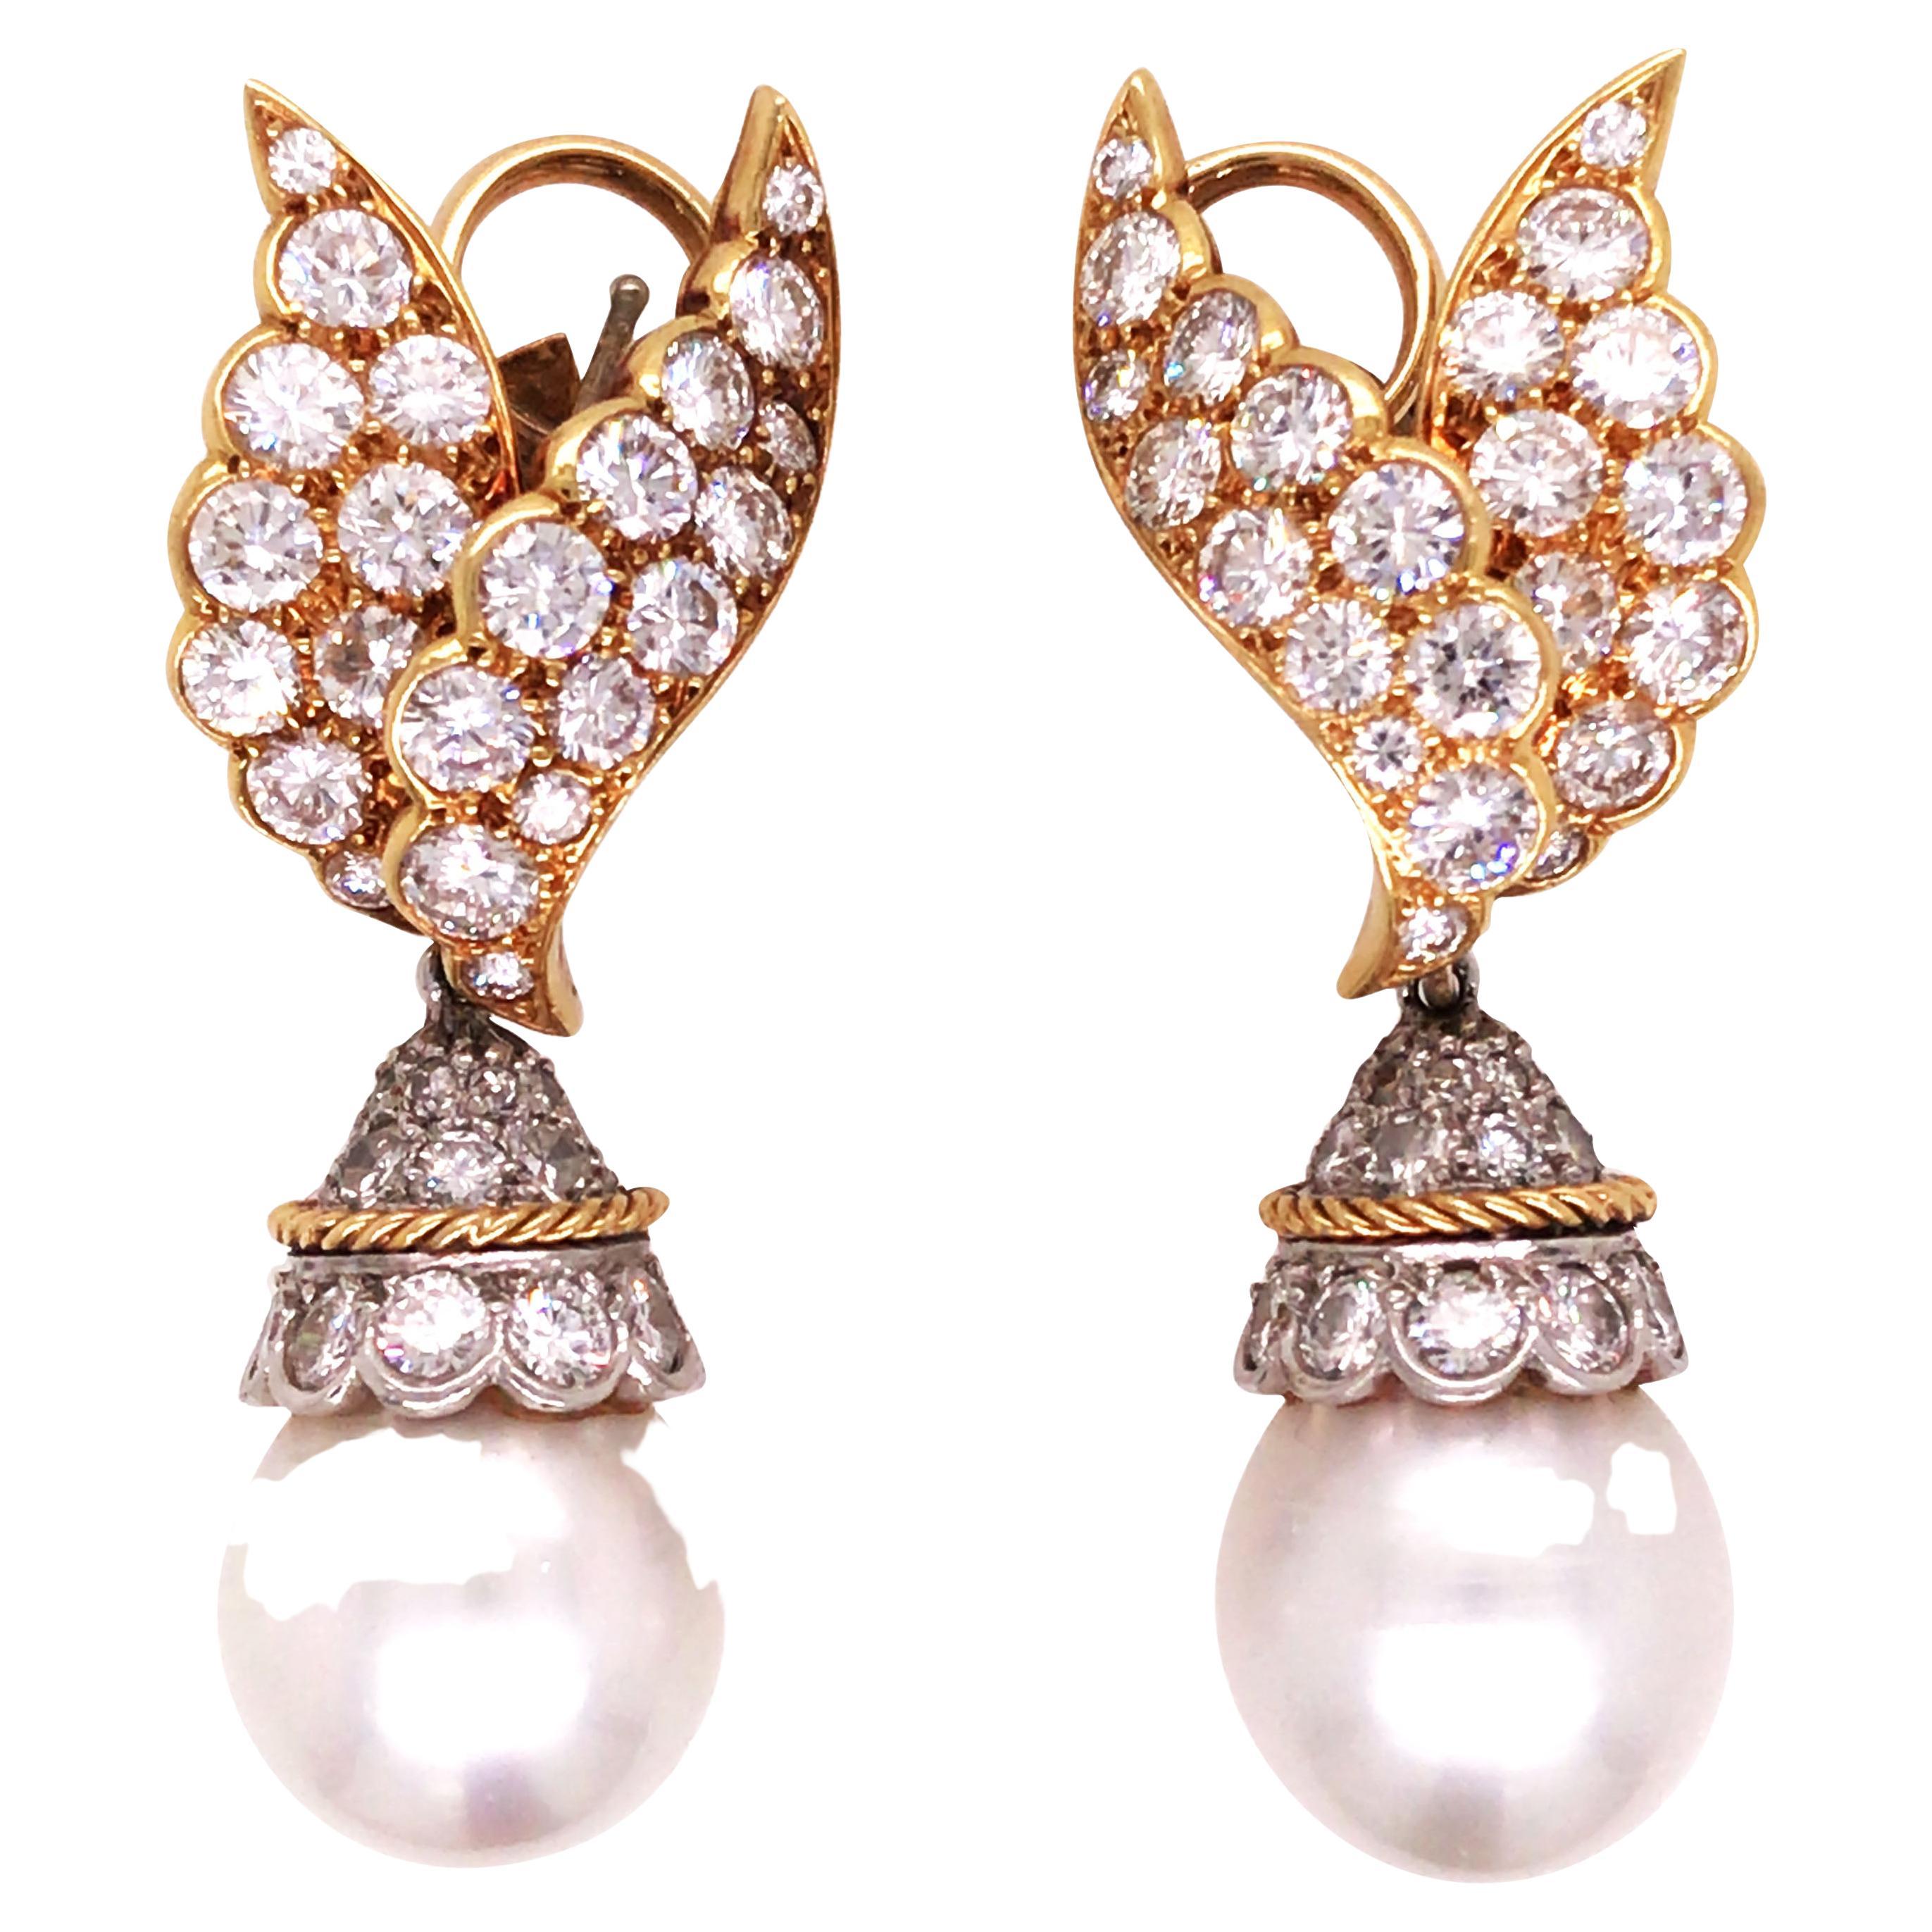 VAN CLEEF and ARPELS ALHAMBRA 18K Gold Mother-of-Pearl Earrings at ...